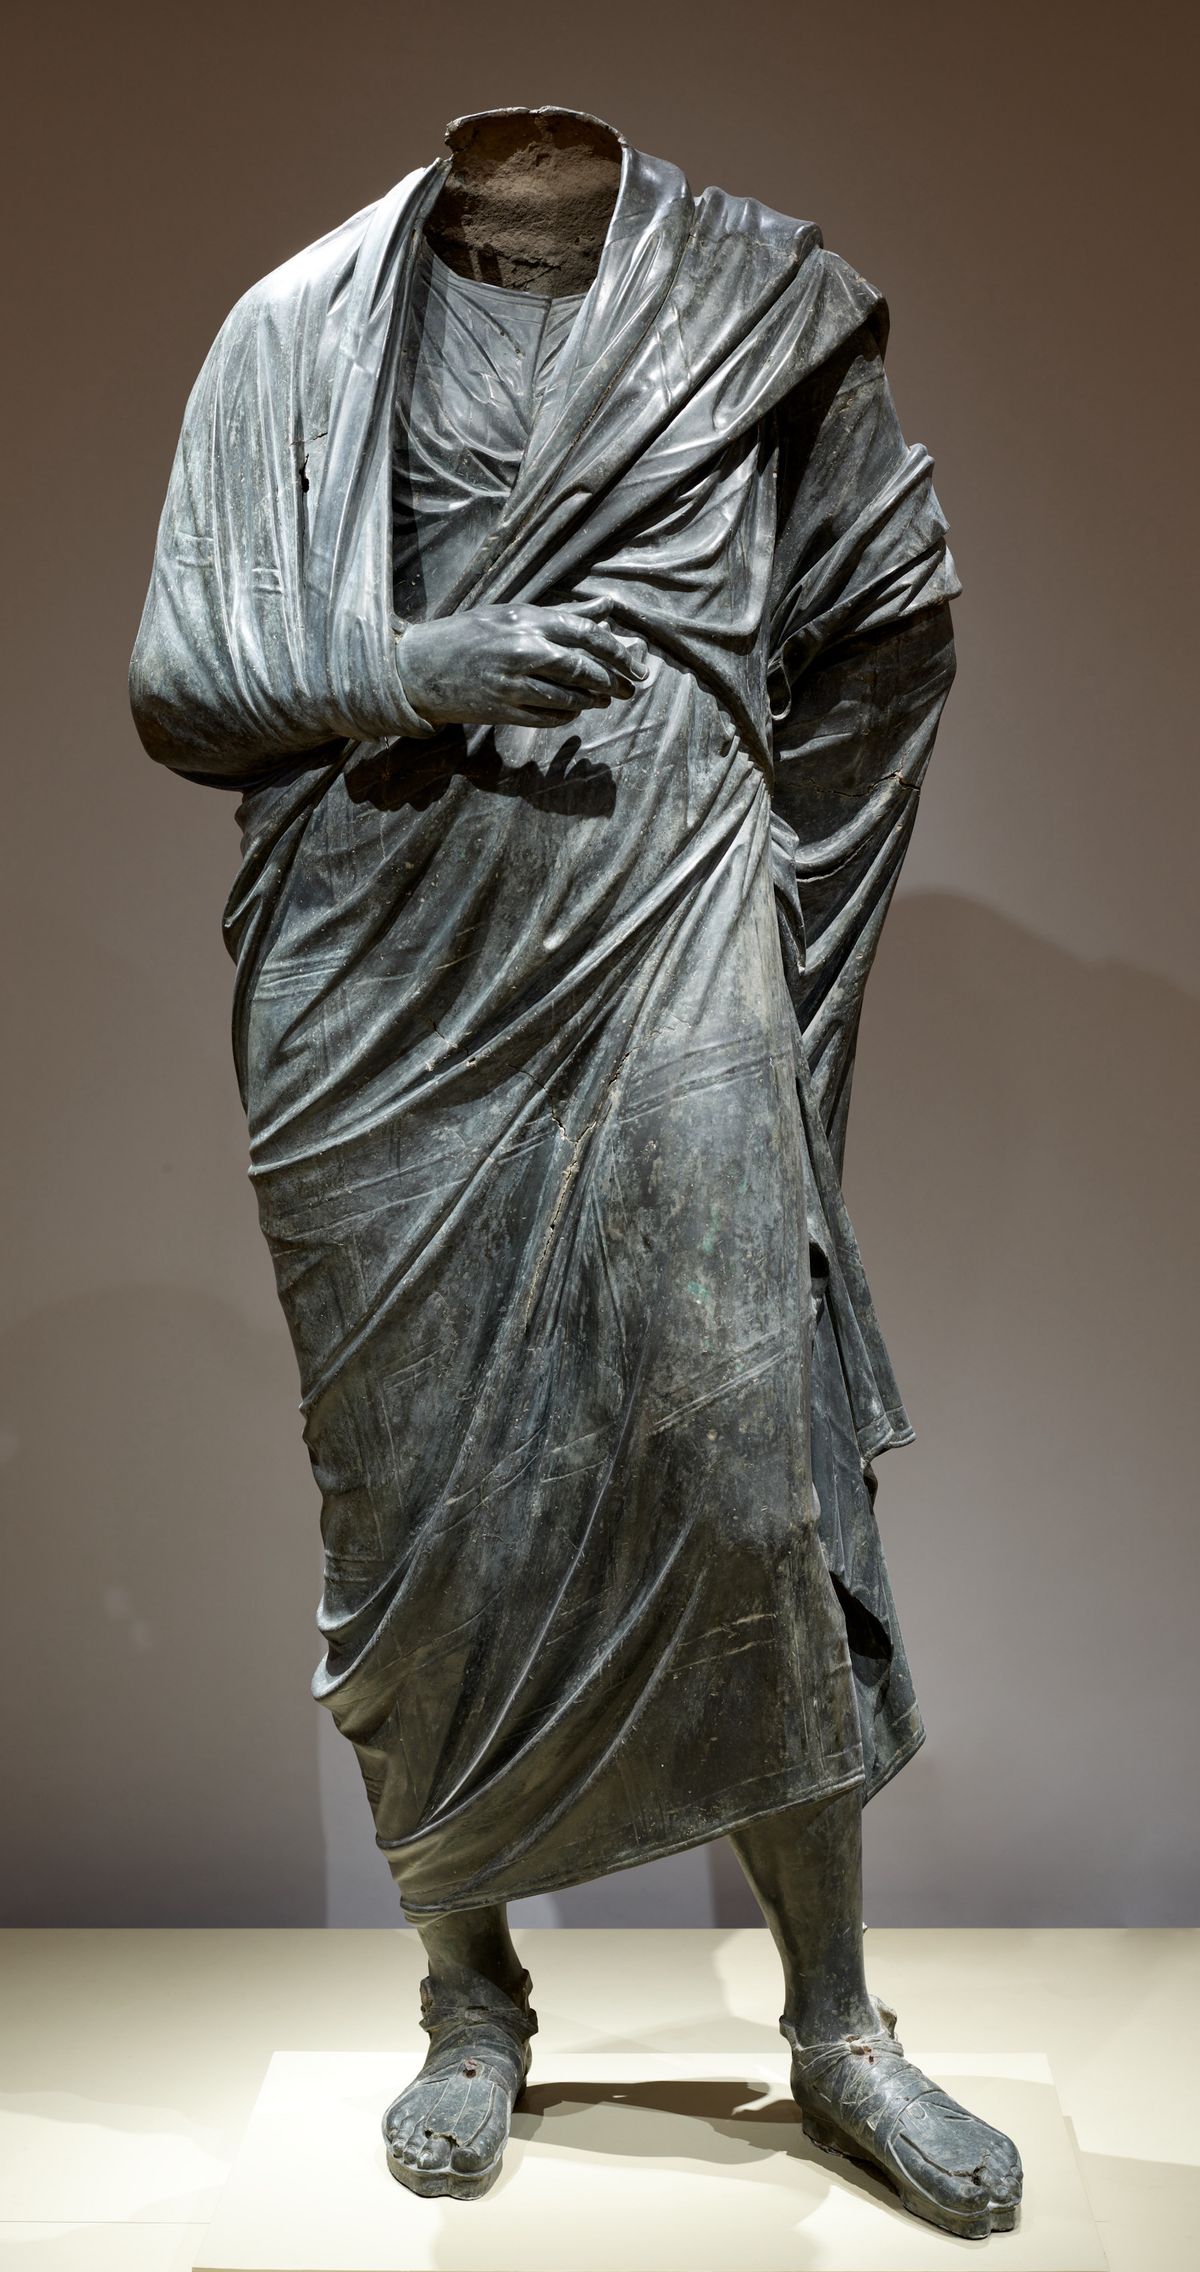 This bronze statue was formerly described by the Cleveland Museum of Art as likely depicting Roman emperor Marcus Aurelius as a philosopher. Now it is described as Draped Male Figure, around 150BCE-200CE. Roman or possibly Greek Hellenistic. The Cleveland Museum of Art